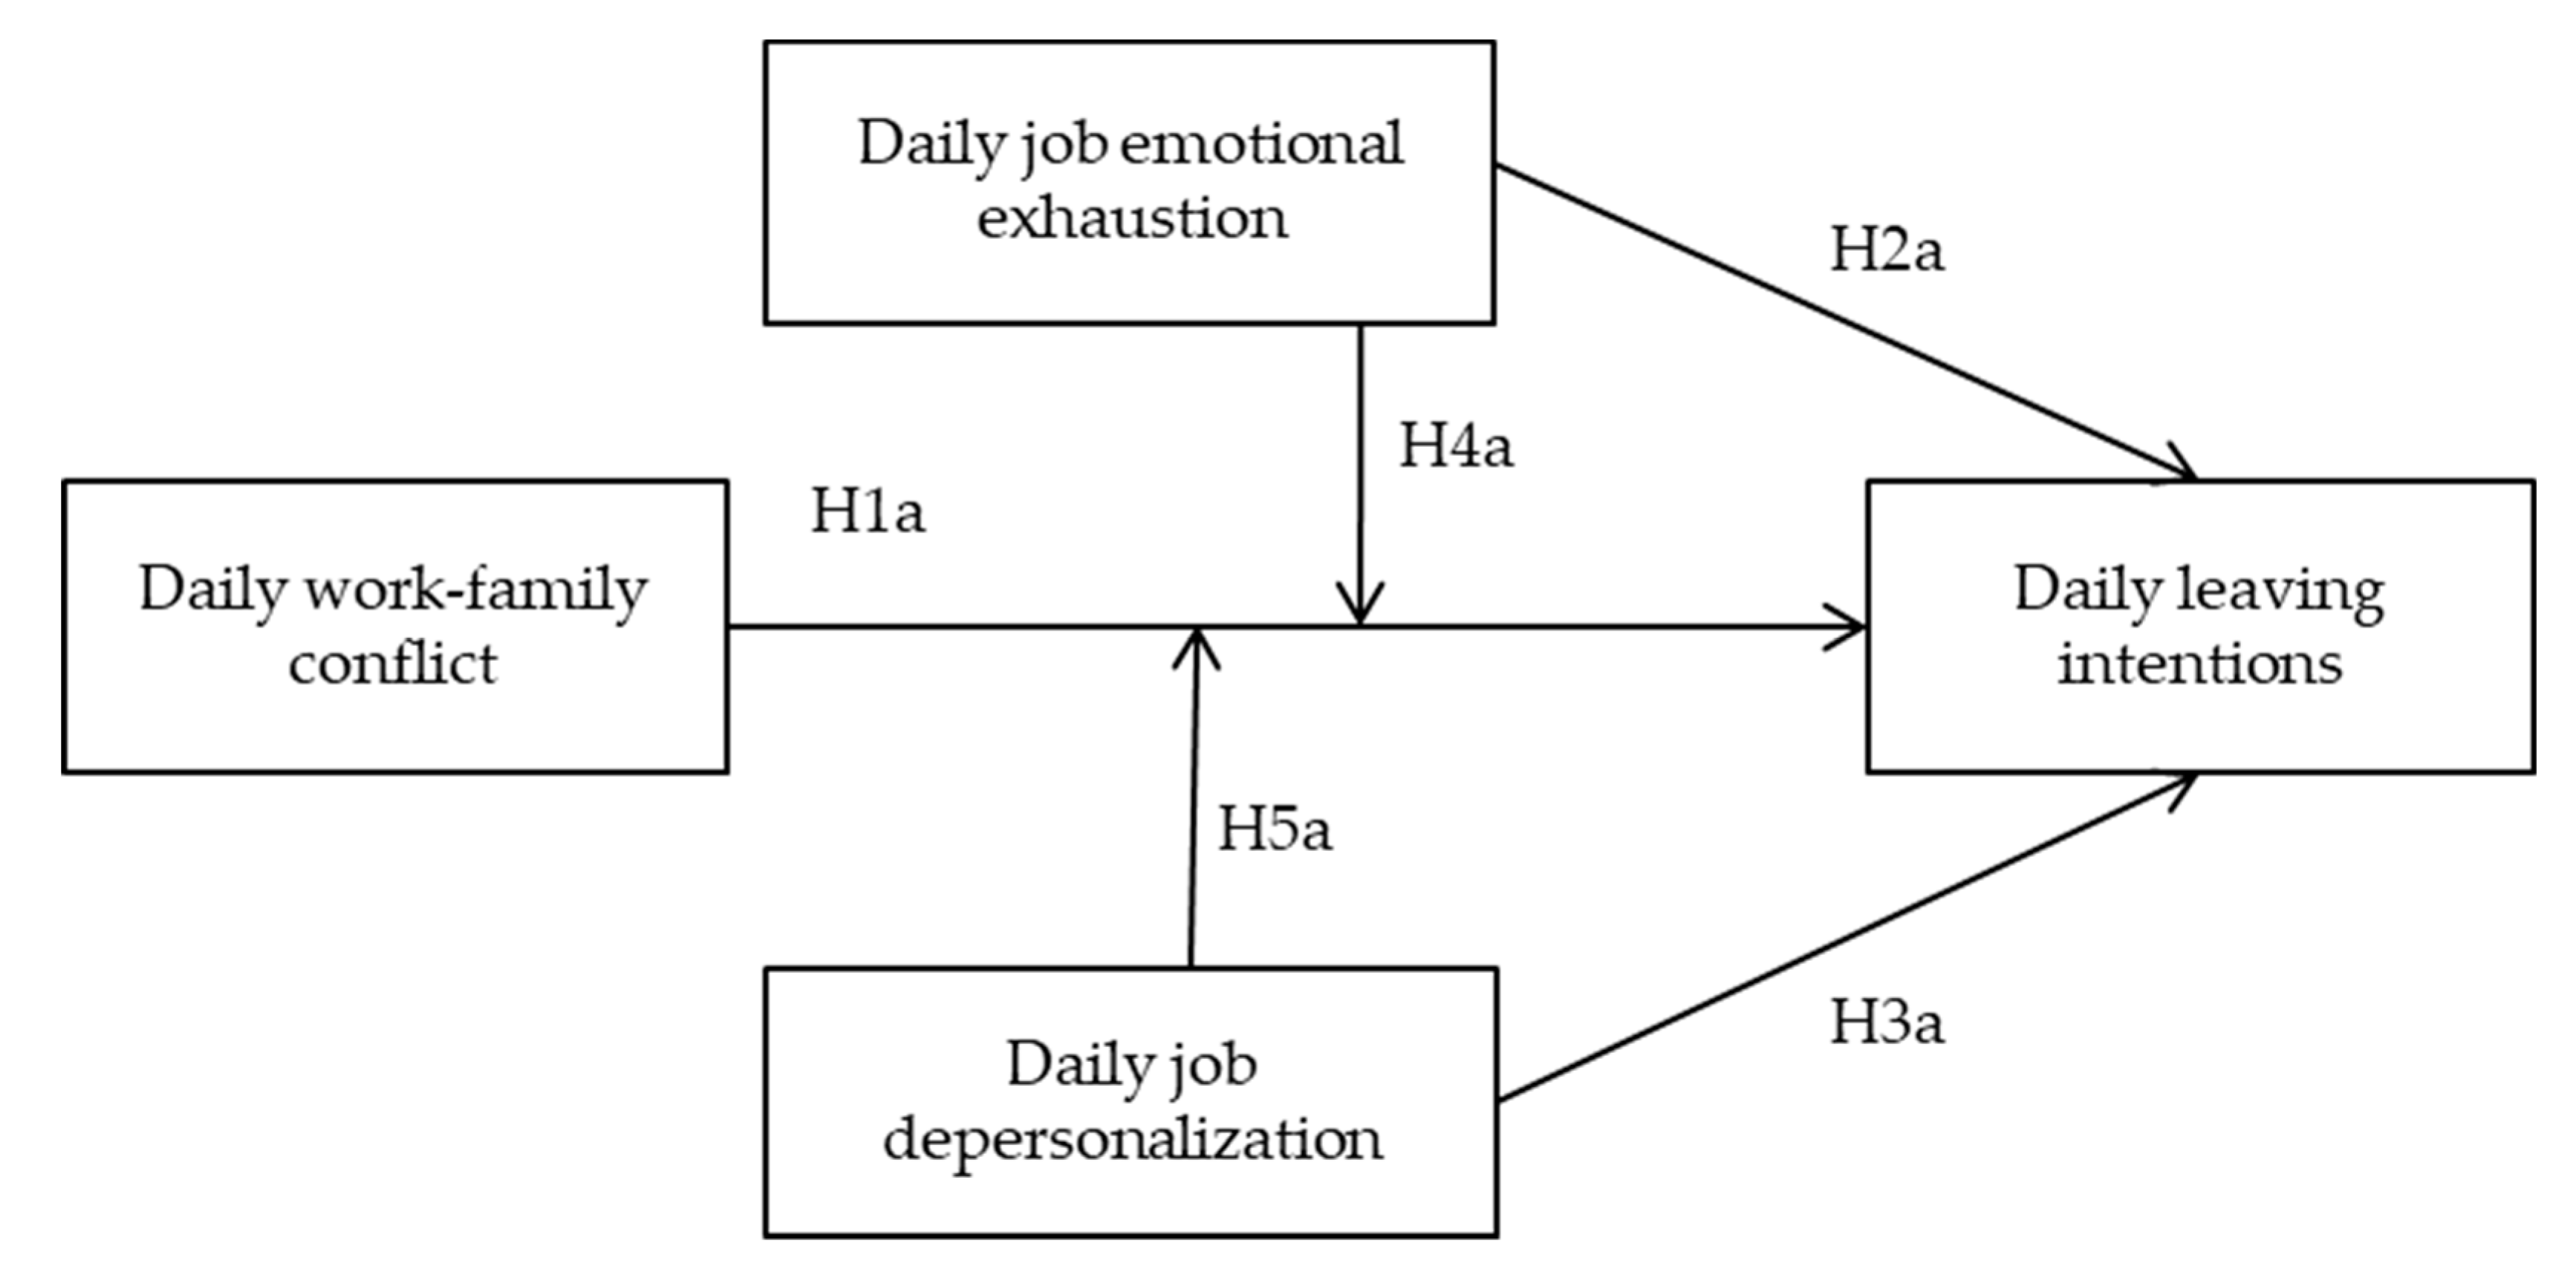 IJERPH | Free Full-Text | Daily Work-Family Conflict and Burnout to Explain  the Leaving Intentions and Vitality Levels of Healthcare Workers:  Interactive Effects Using an Experience-Sampling Method